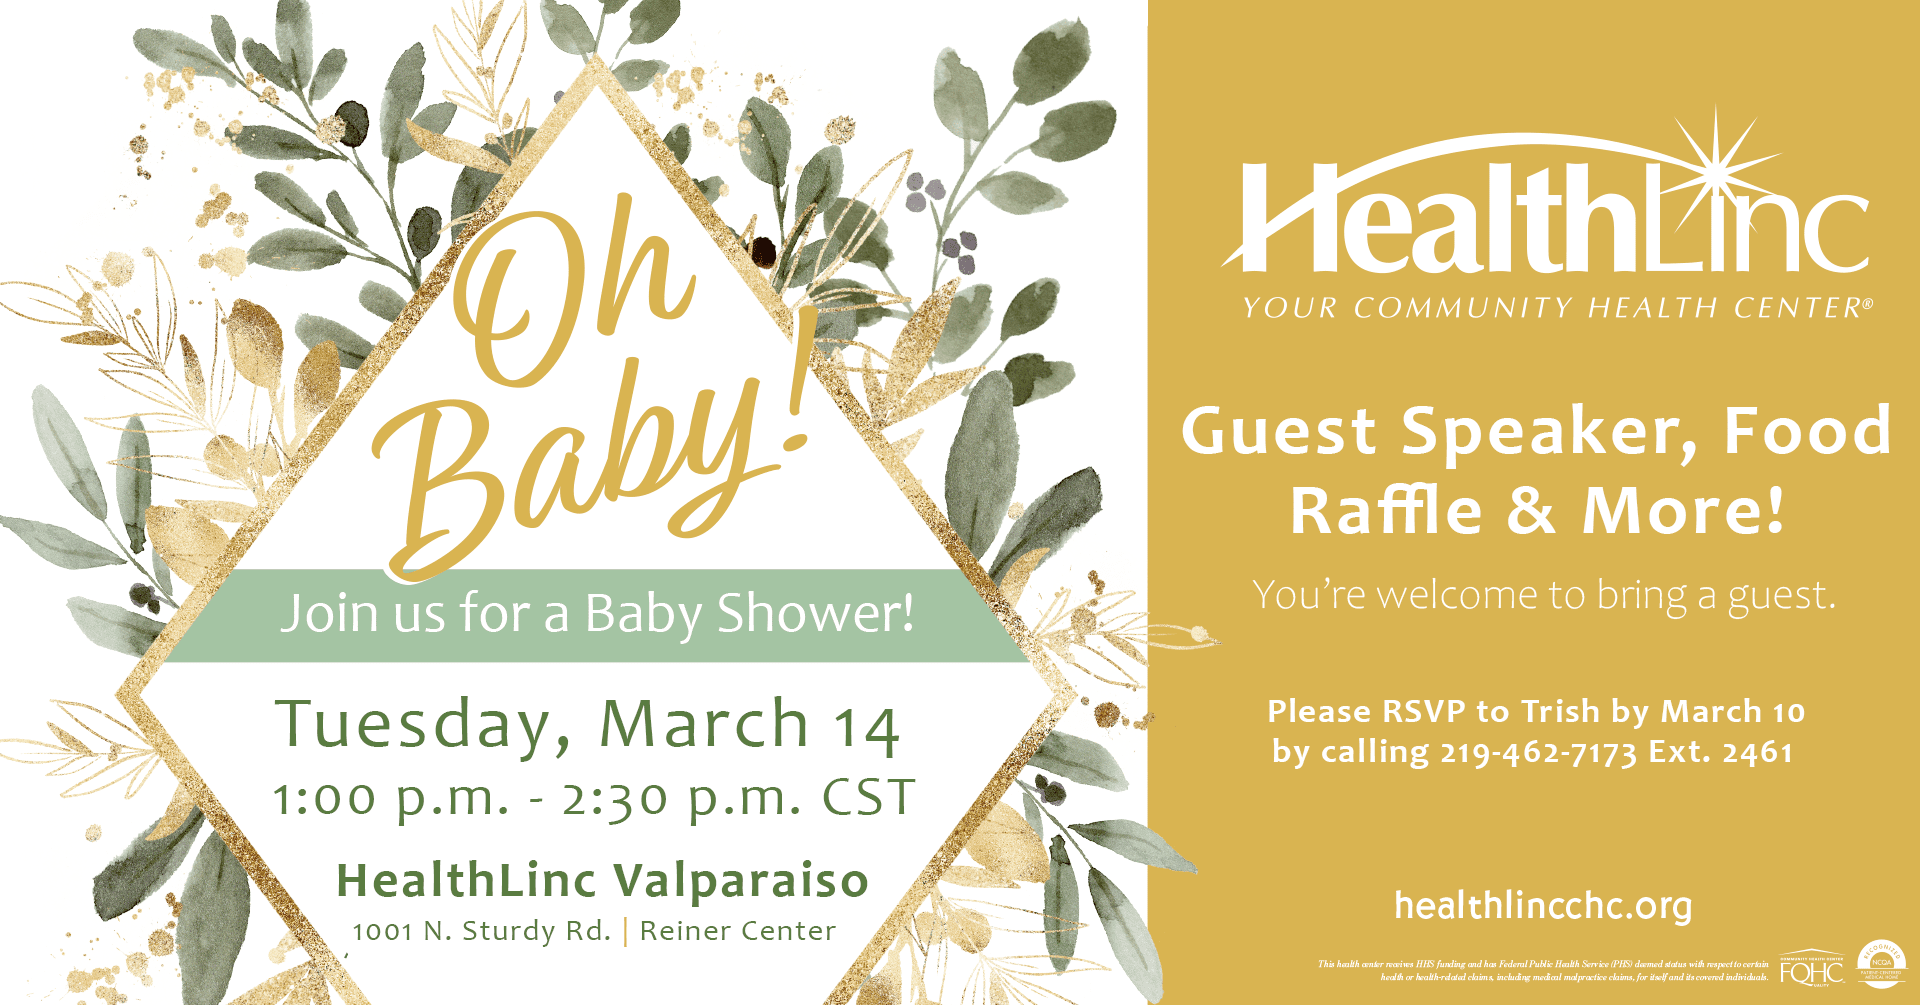 A banner for the baby shower at HealthLinc Valparaiso on March 14 from 1-2:30 p.m. CST at 1001 N. Sturdy Rd., Valparaiso, IN